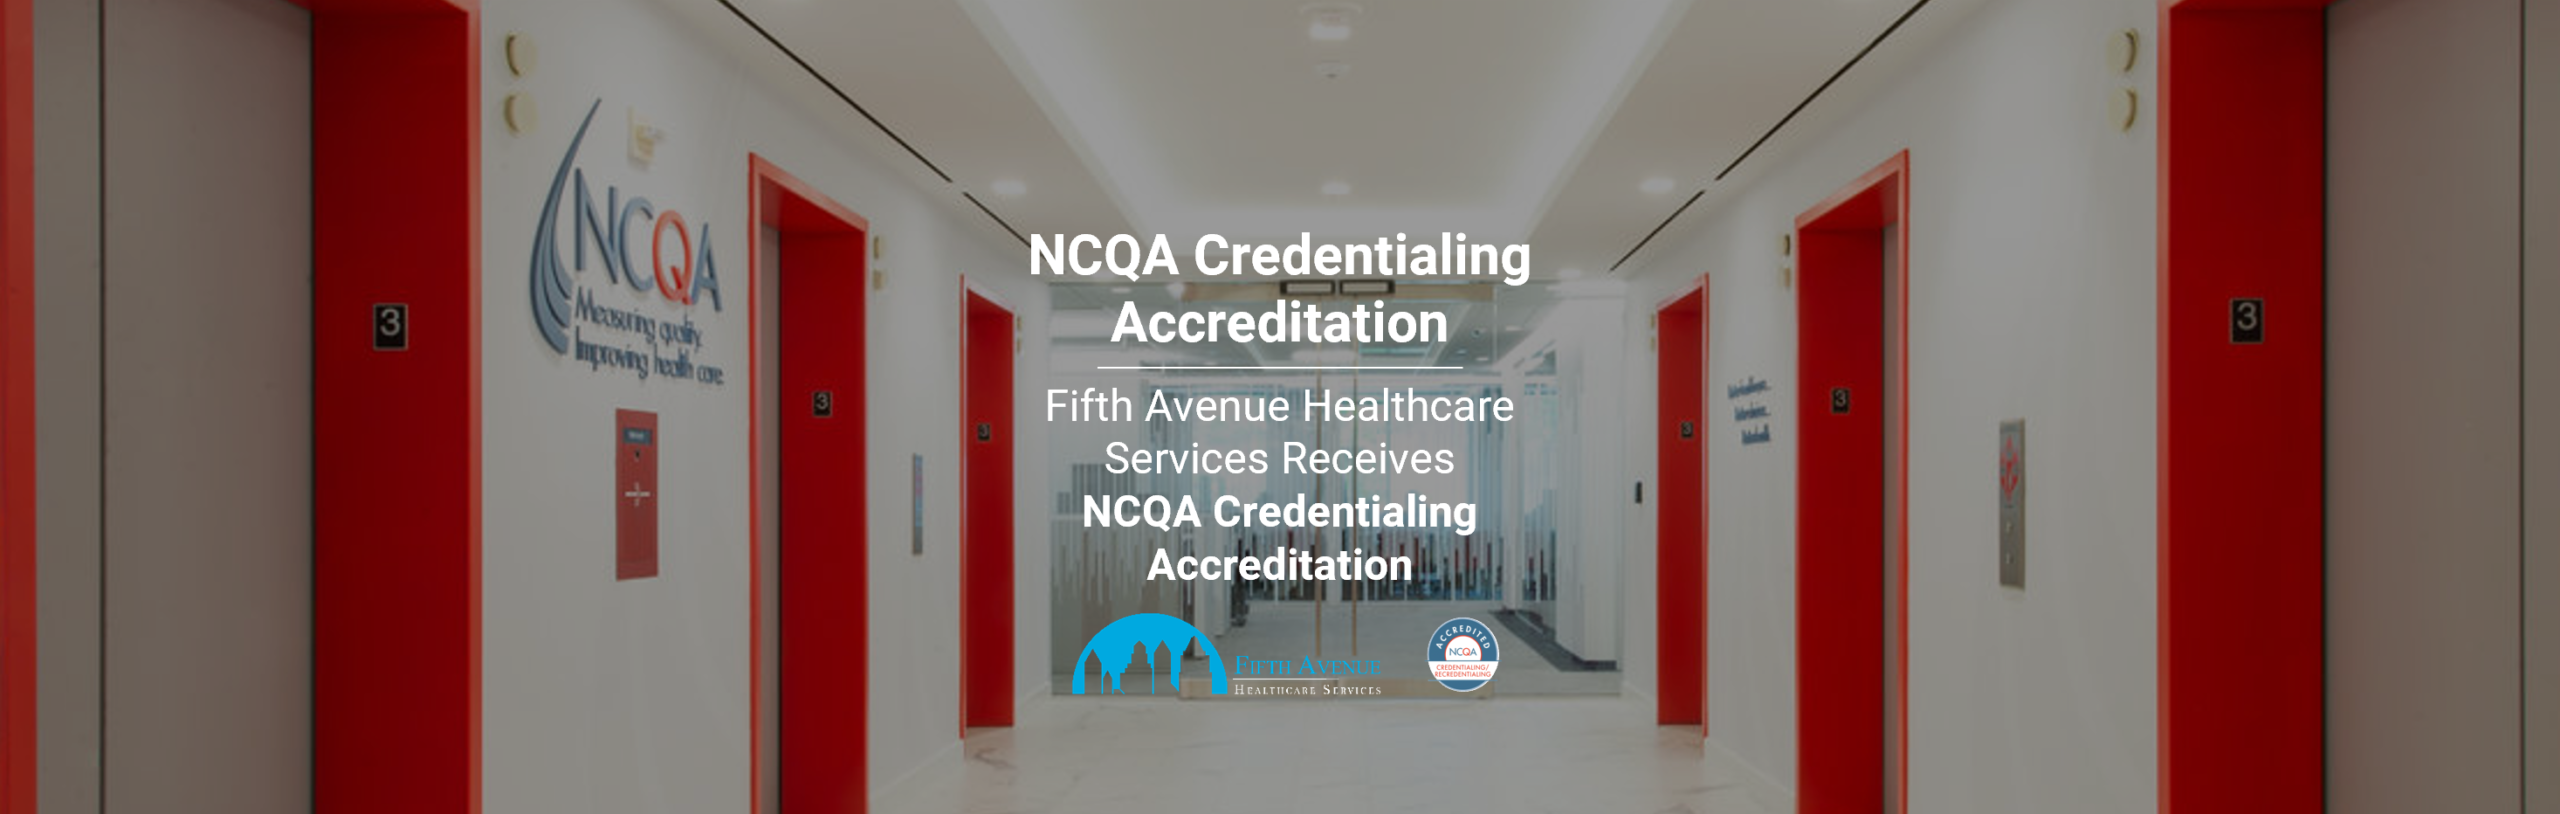 NCQA Credentialing Accreditation Obtained by Fifth Avenue Healthcare Services